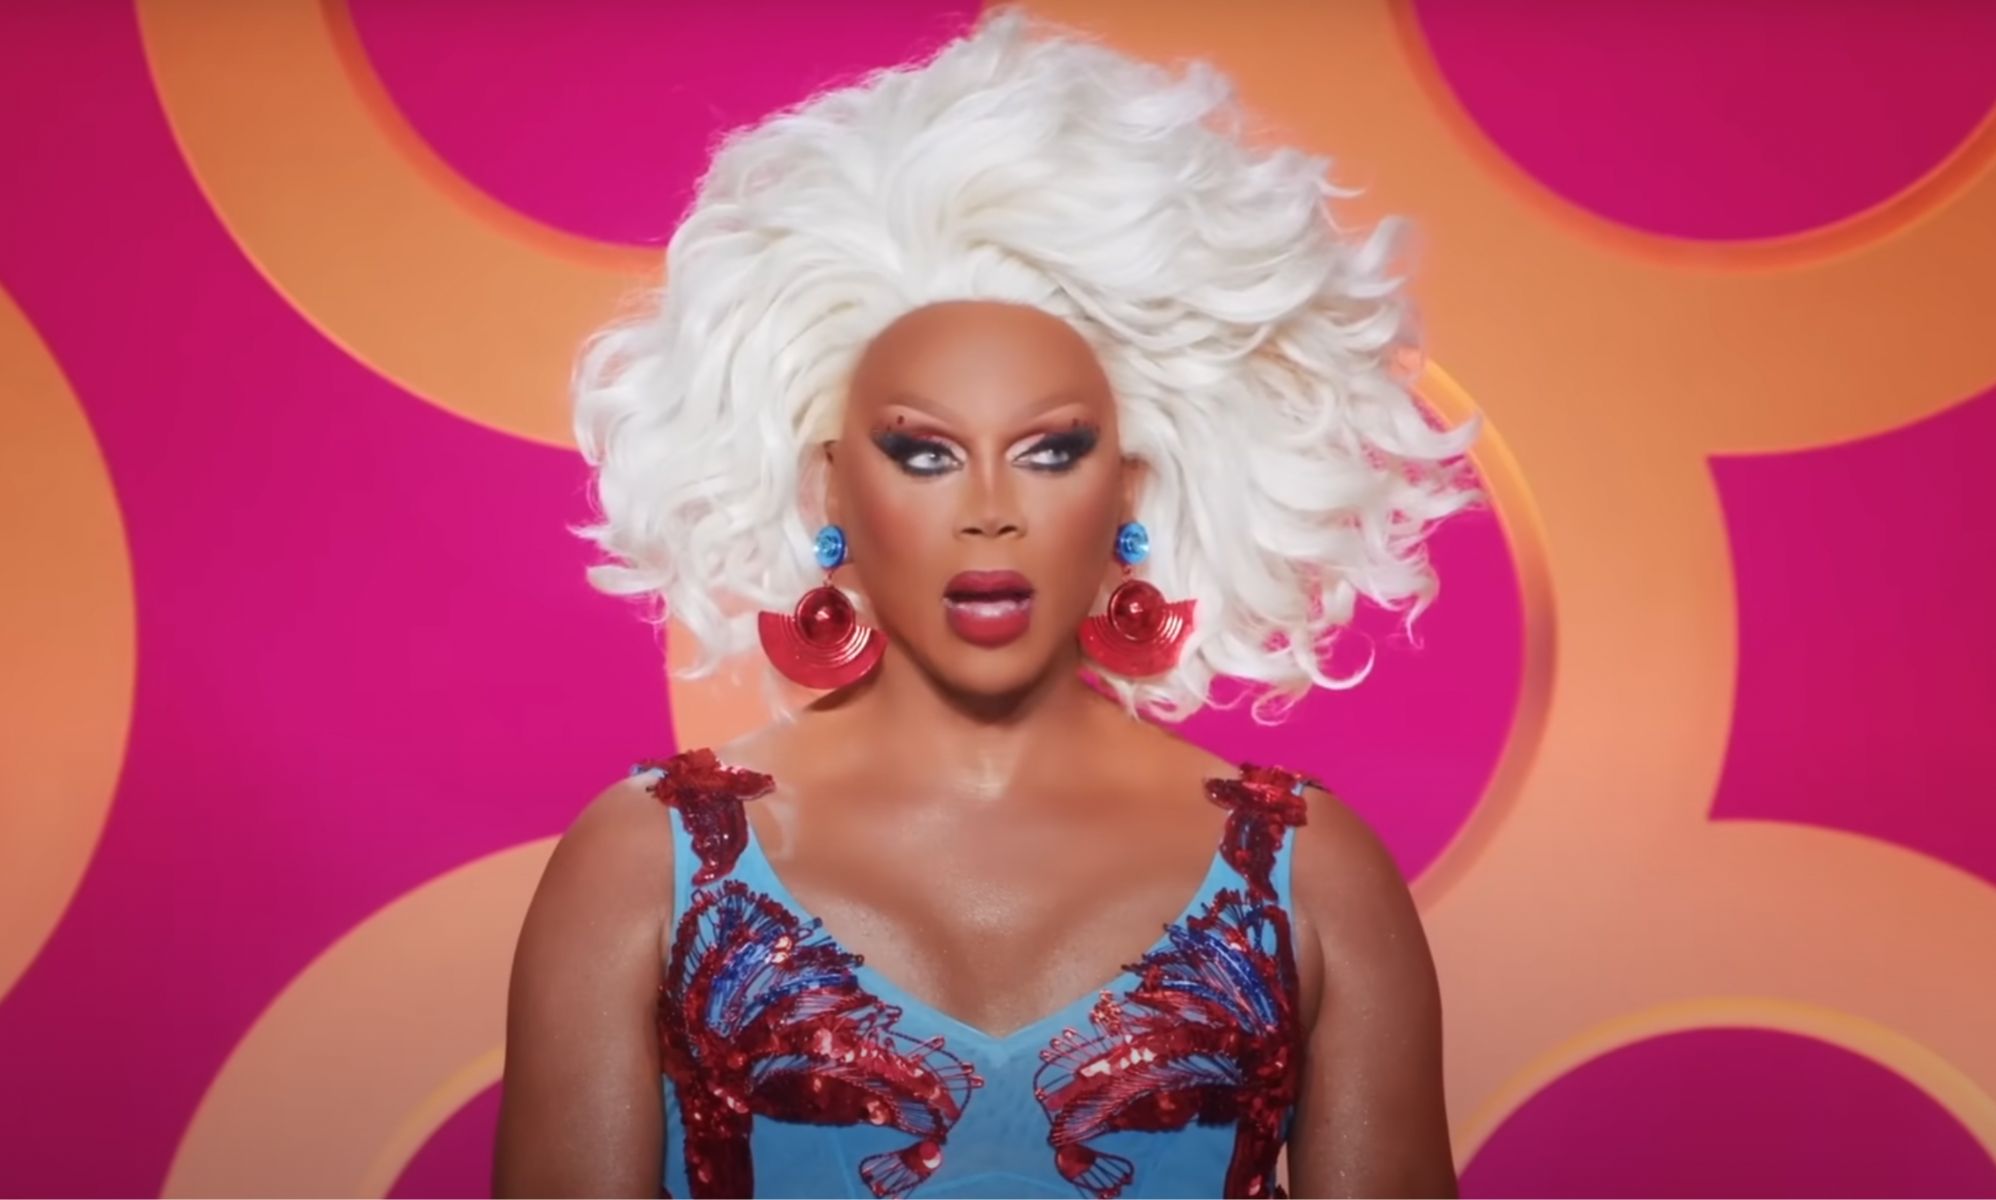 Winner of Drag Race declines offer to participate in Canada vs the World